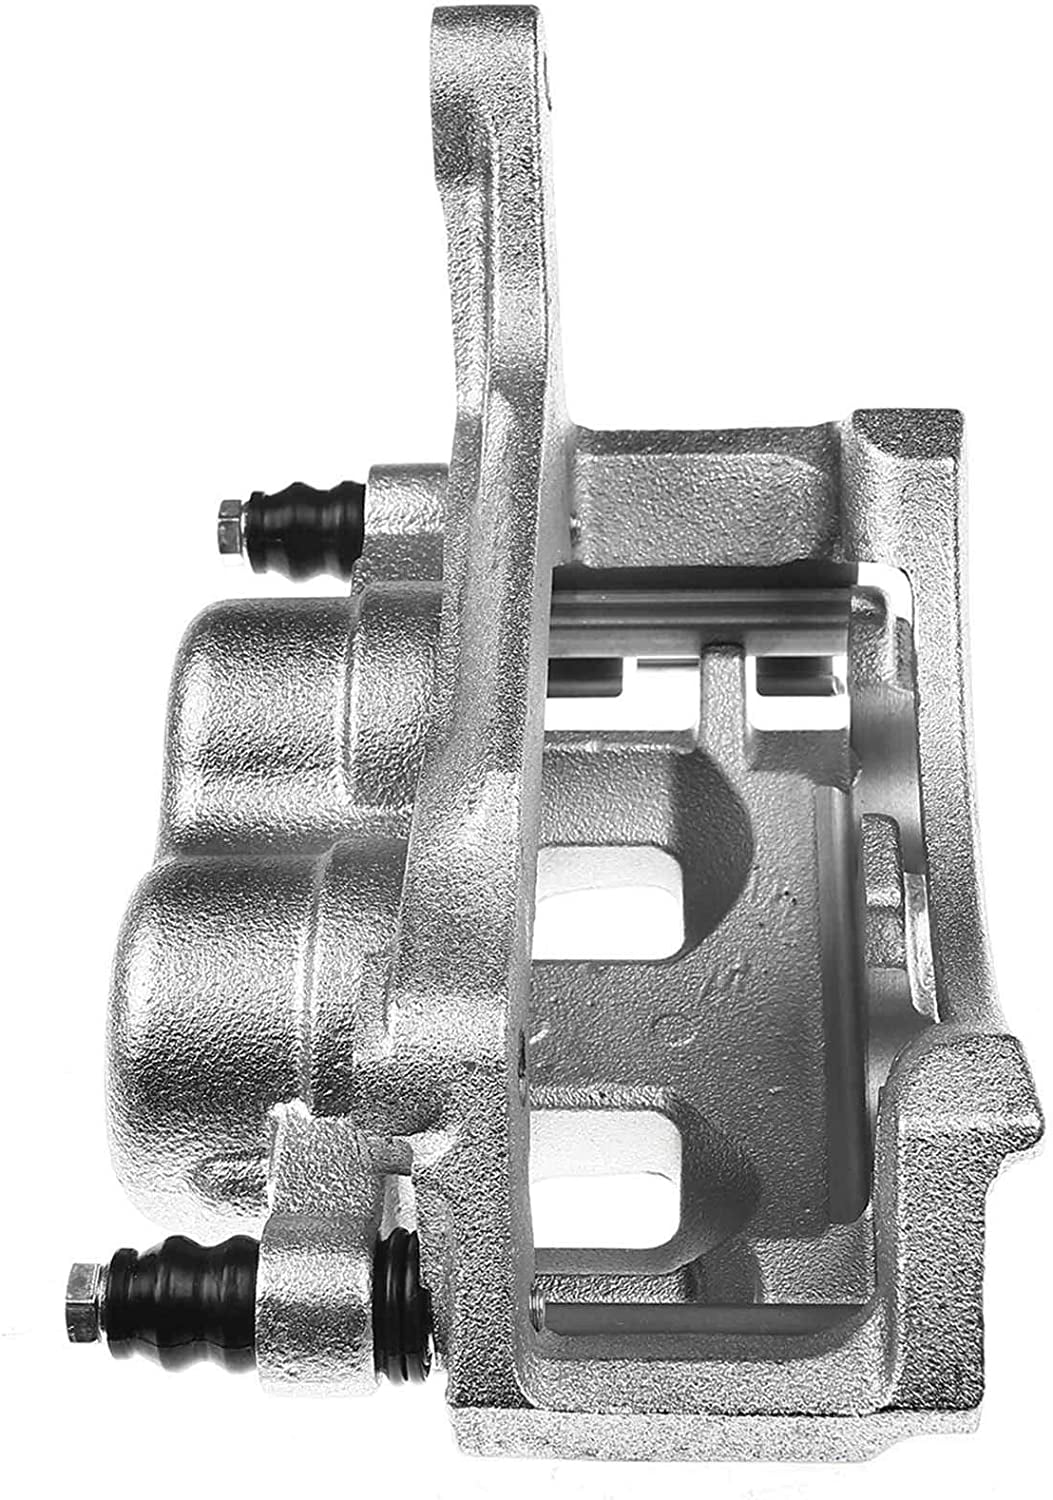 A-Premium Brake Caliper Assembly with Bracket Compatible with Dodge B1500 1998 Ram 1500 Van 1998-2002 Front Passenger Side 